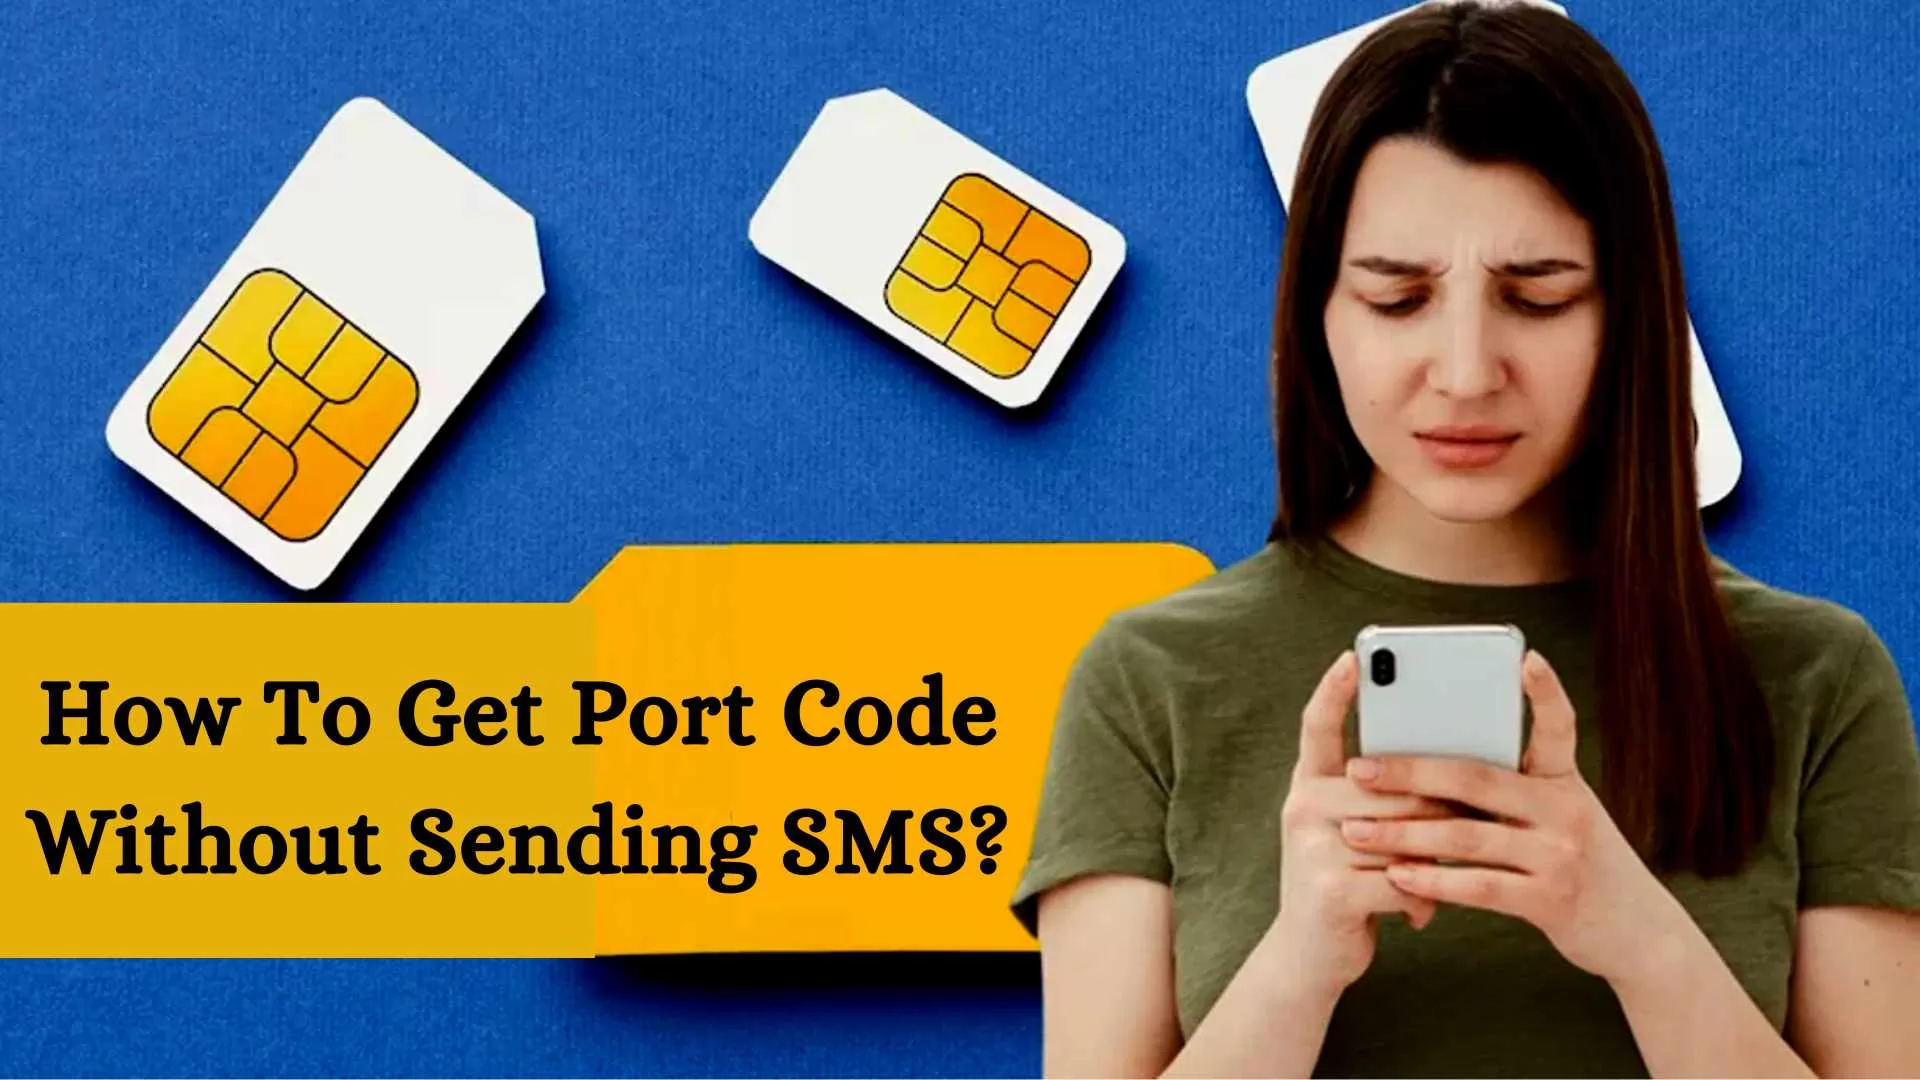 How To Get Port Code Without Sending SMS